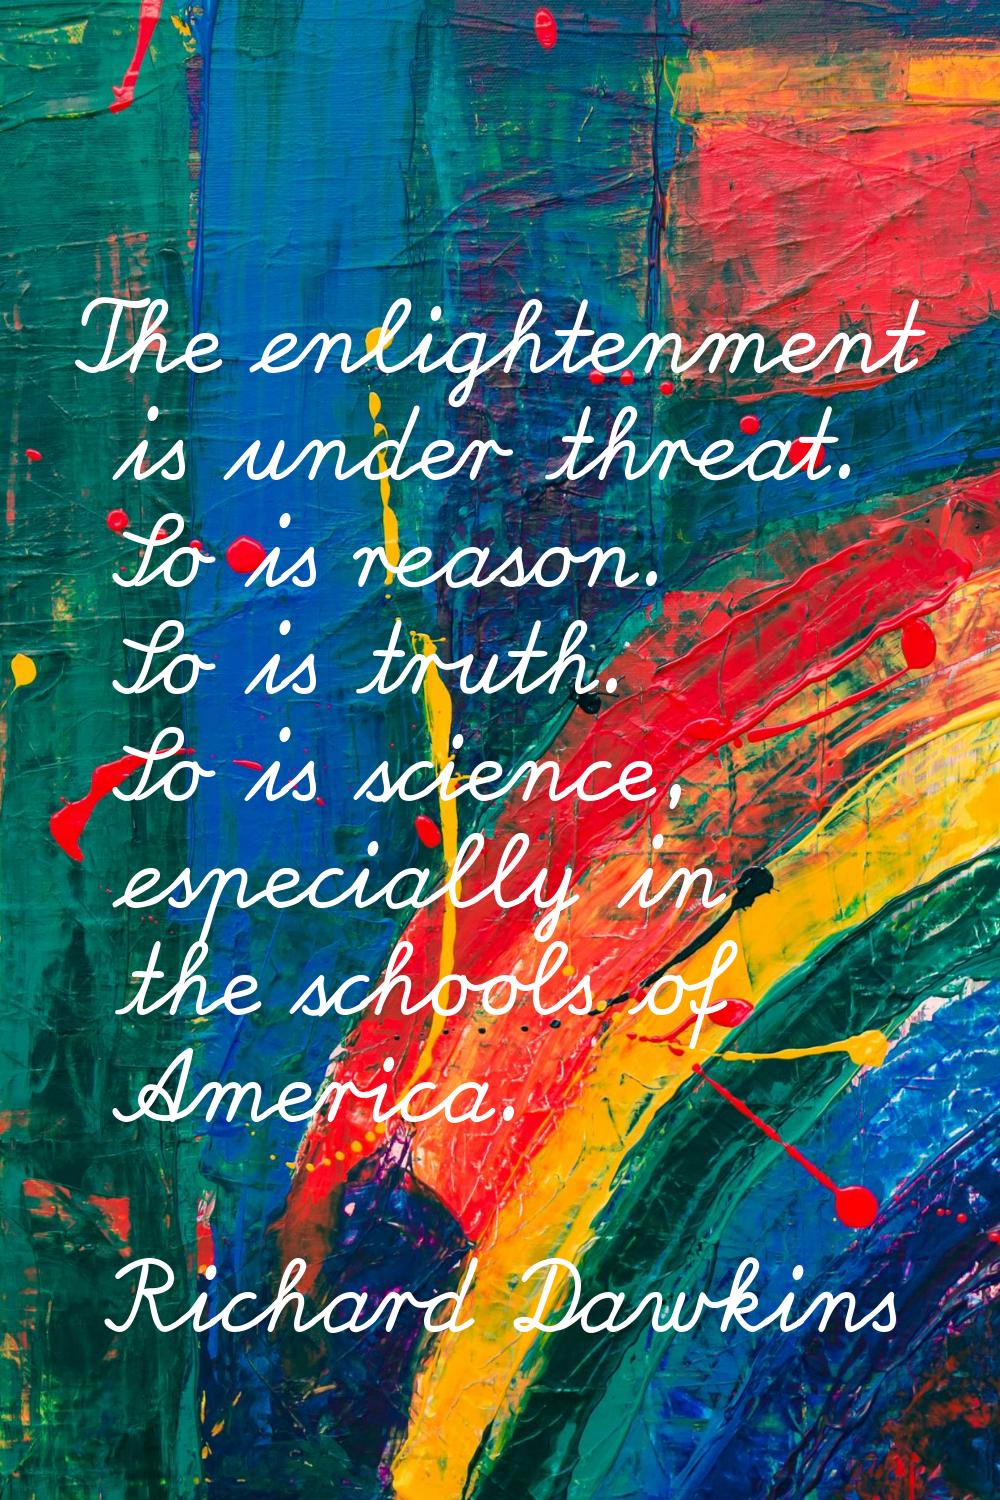 The enlightenment is under threat. So is reason. So is truth. So is science, especially in the scho